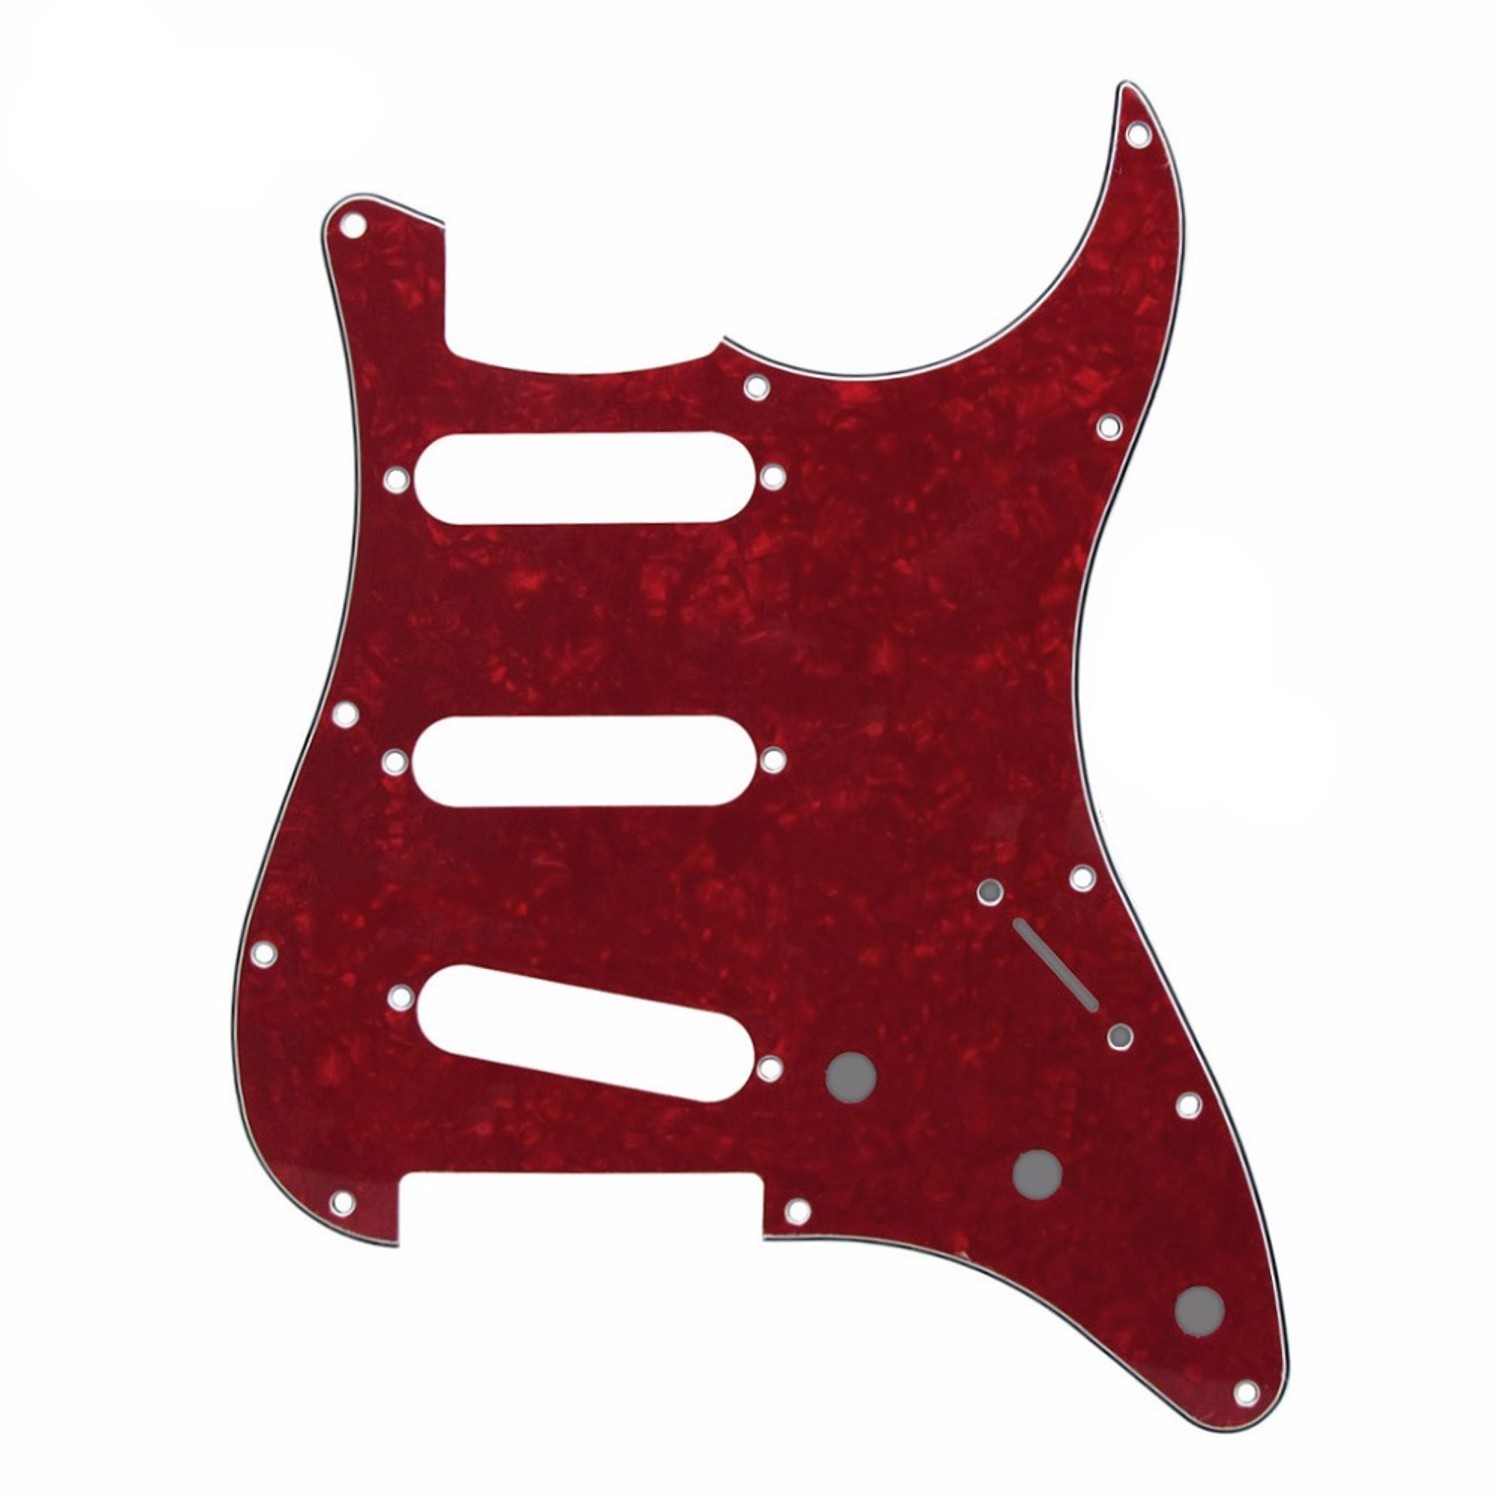 Musiclily Electric Guitar Pickguard for Epiphone Les Paul Modern Style 4Ply Yellow Black 